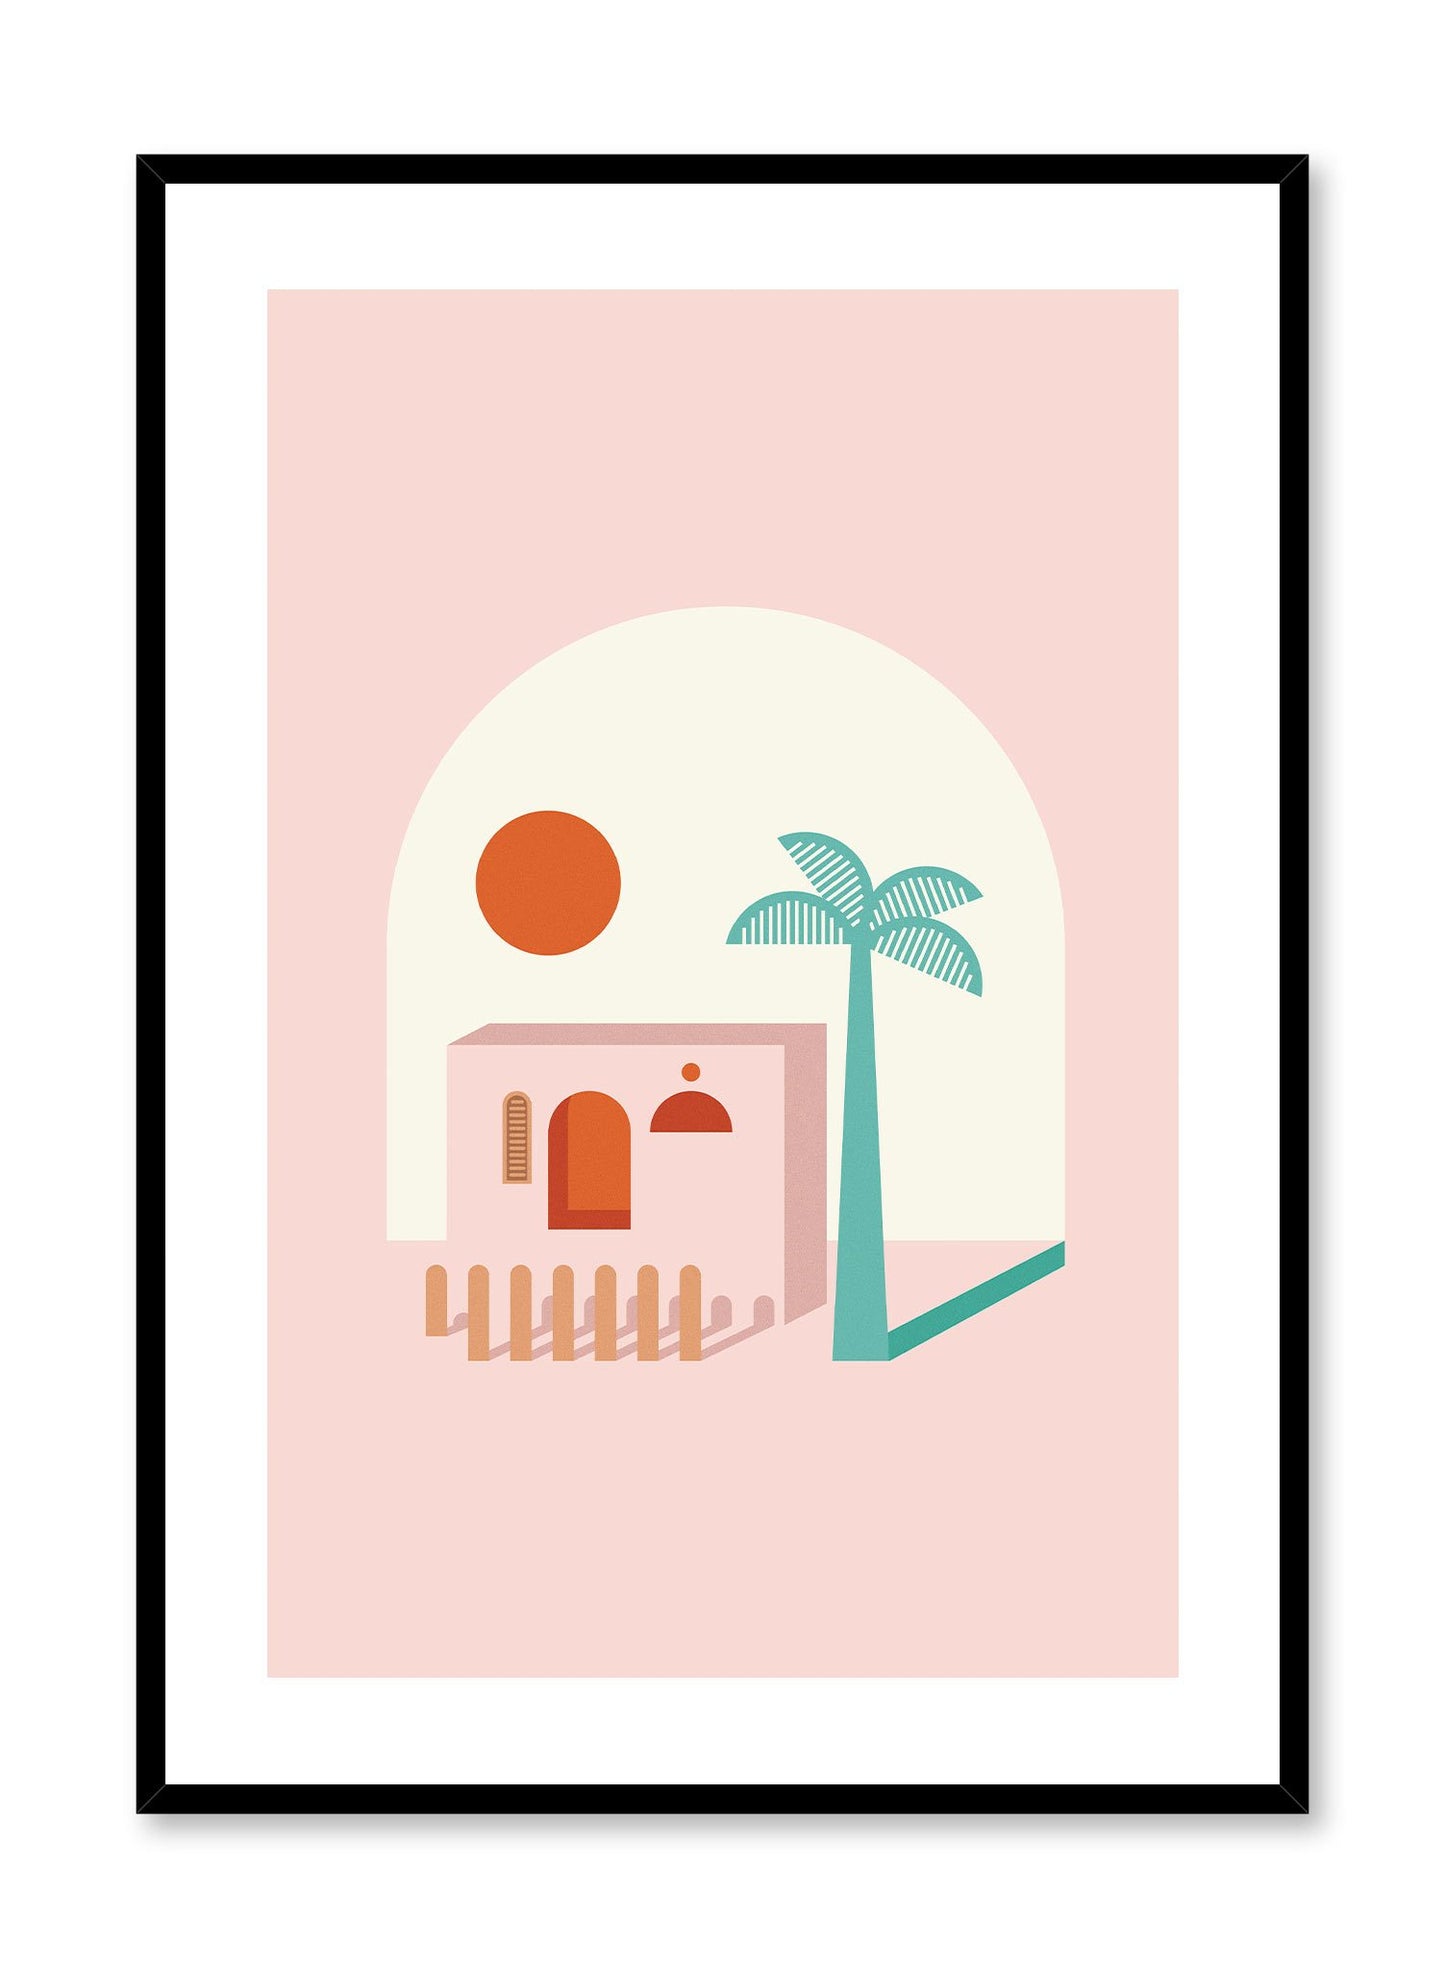 A Place in the Sun is a minimalist illustration poster of a pink beach house by Opposite Wall.